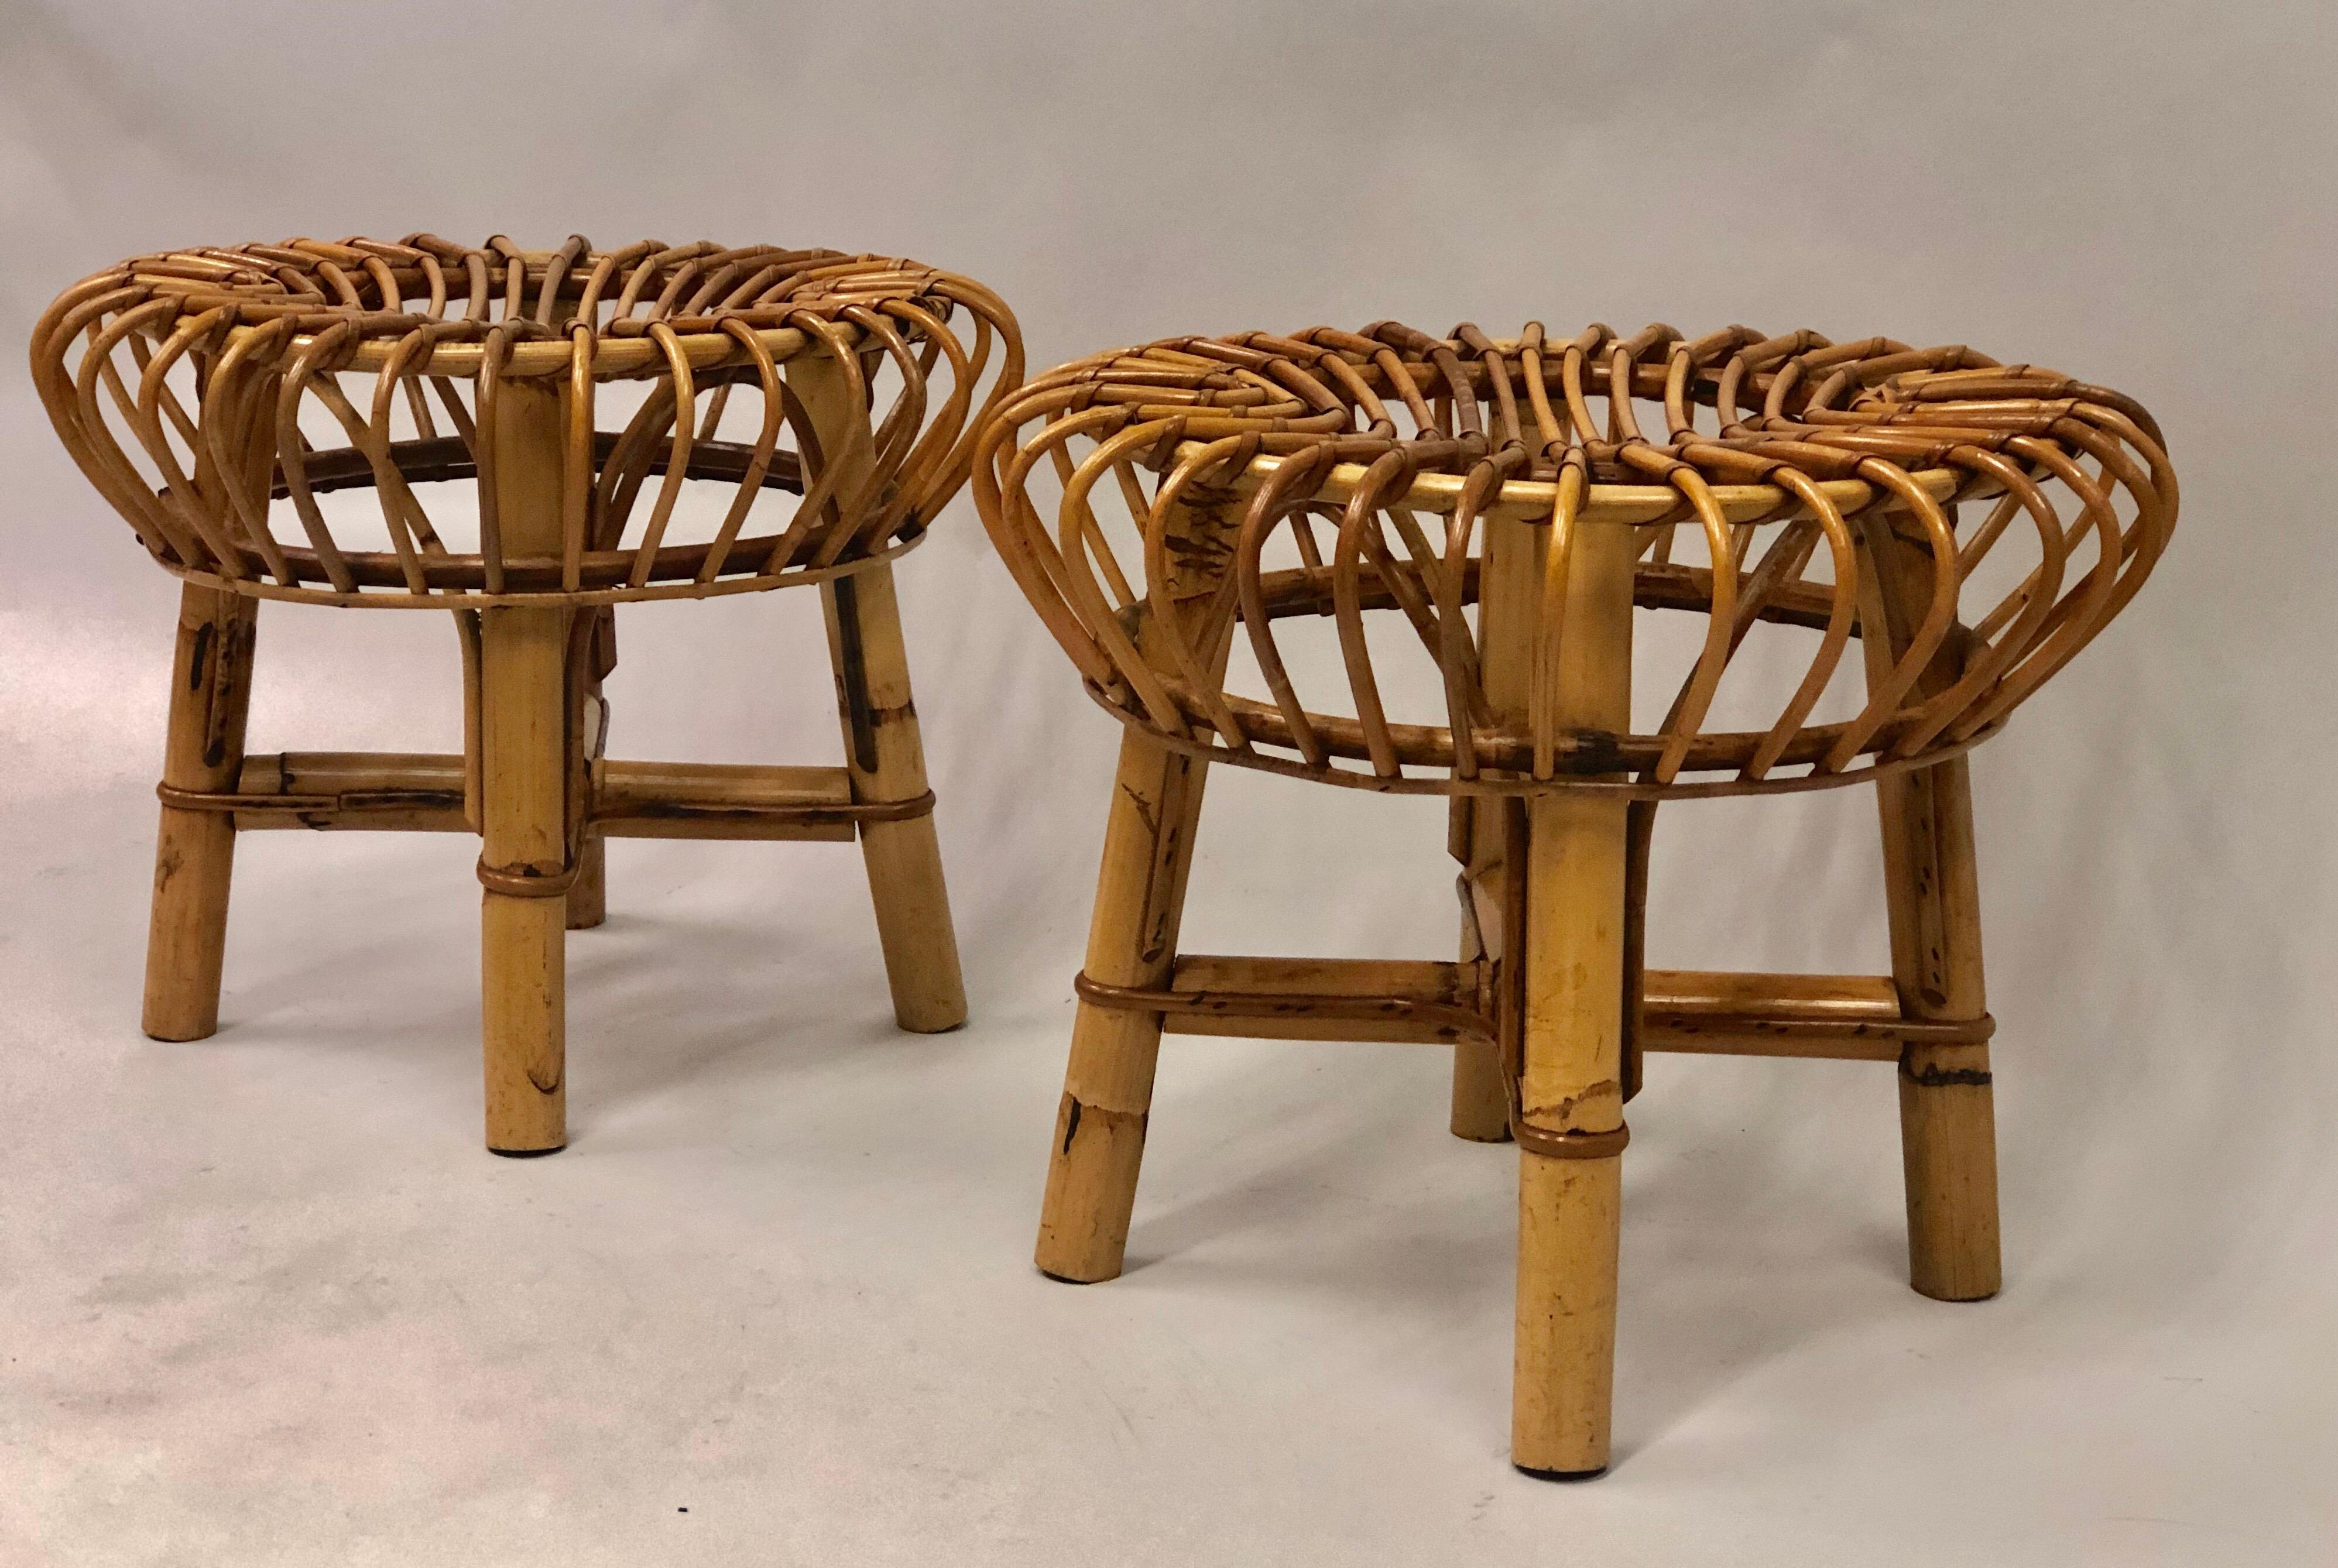 Pair of Italian Mid-Century Modern Rattan and Bamboo Stools by Franco Albini In Good Condition For Sale In New York, NY